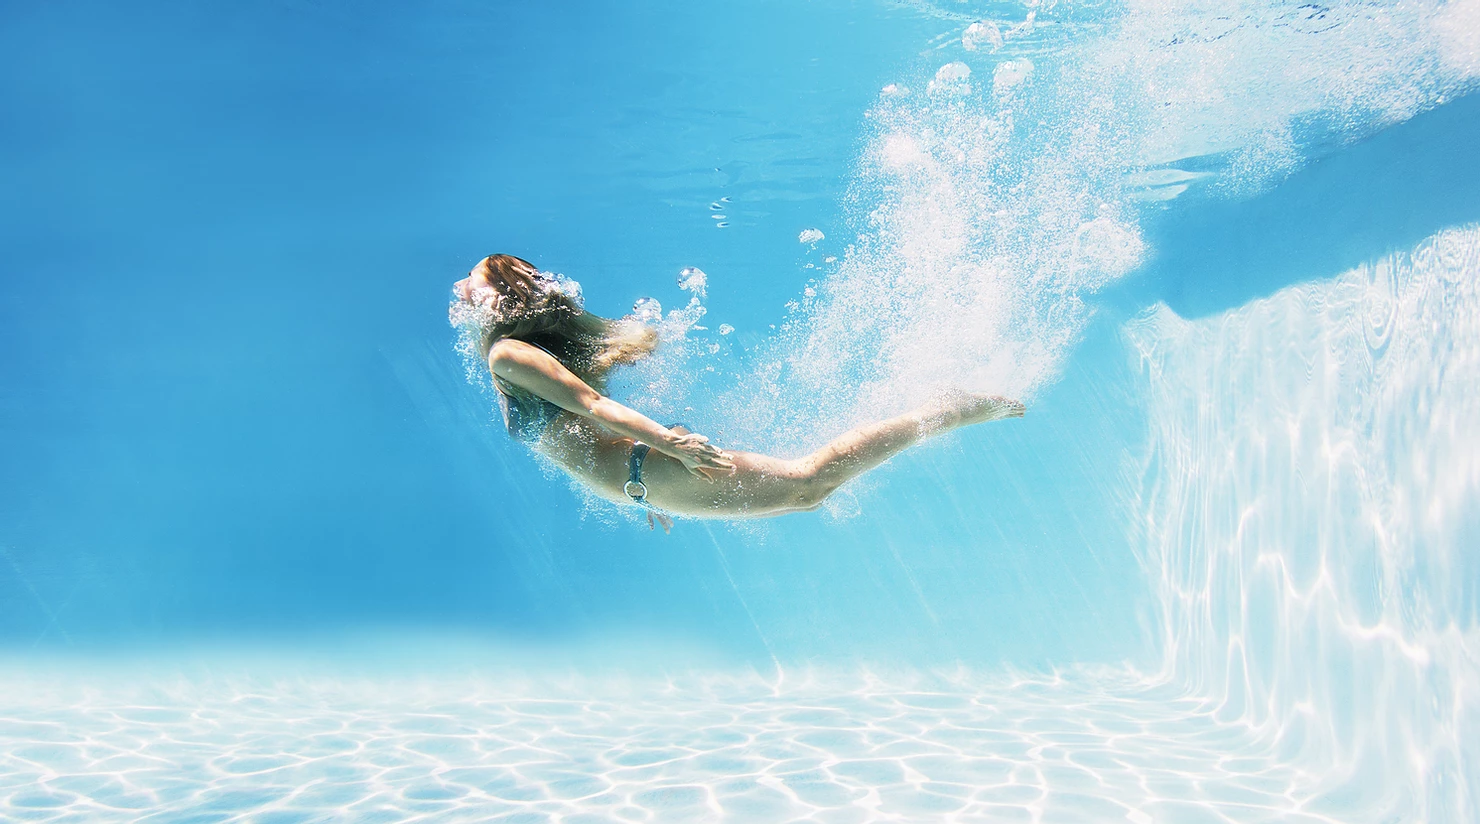 Ladies, you can swim with or without tampons even during your